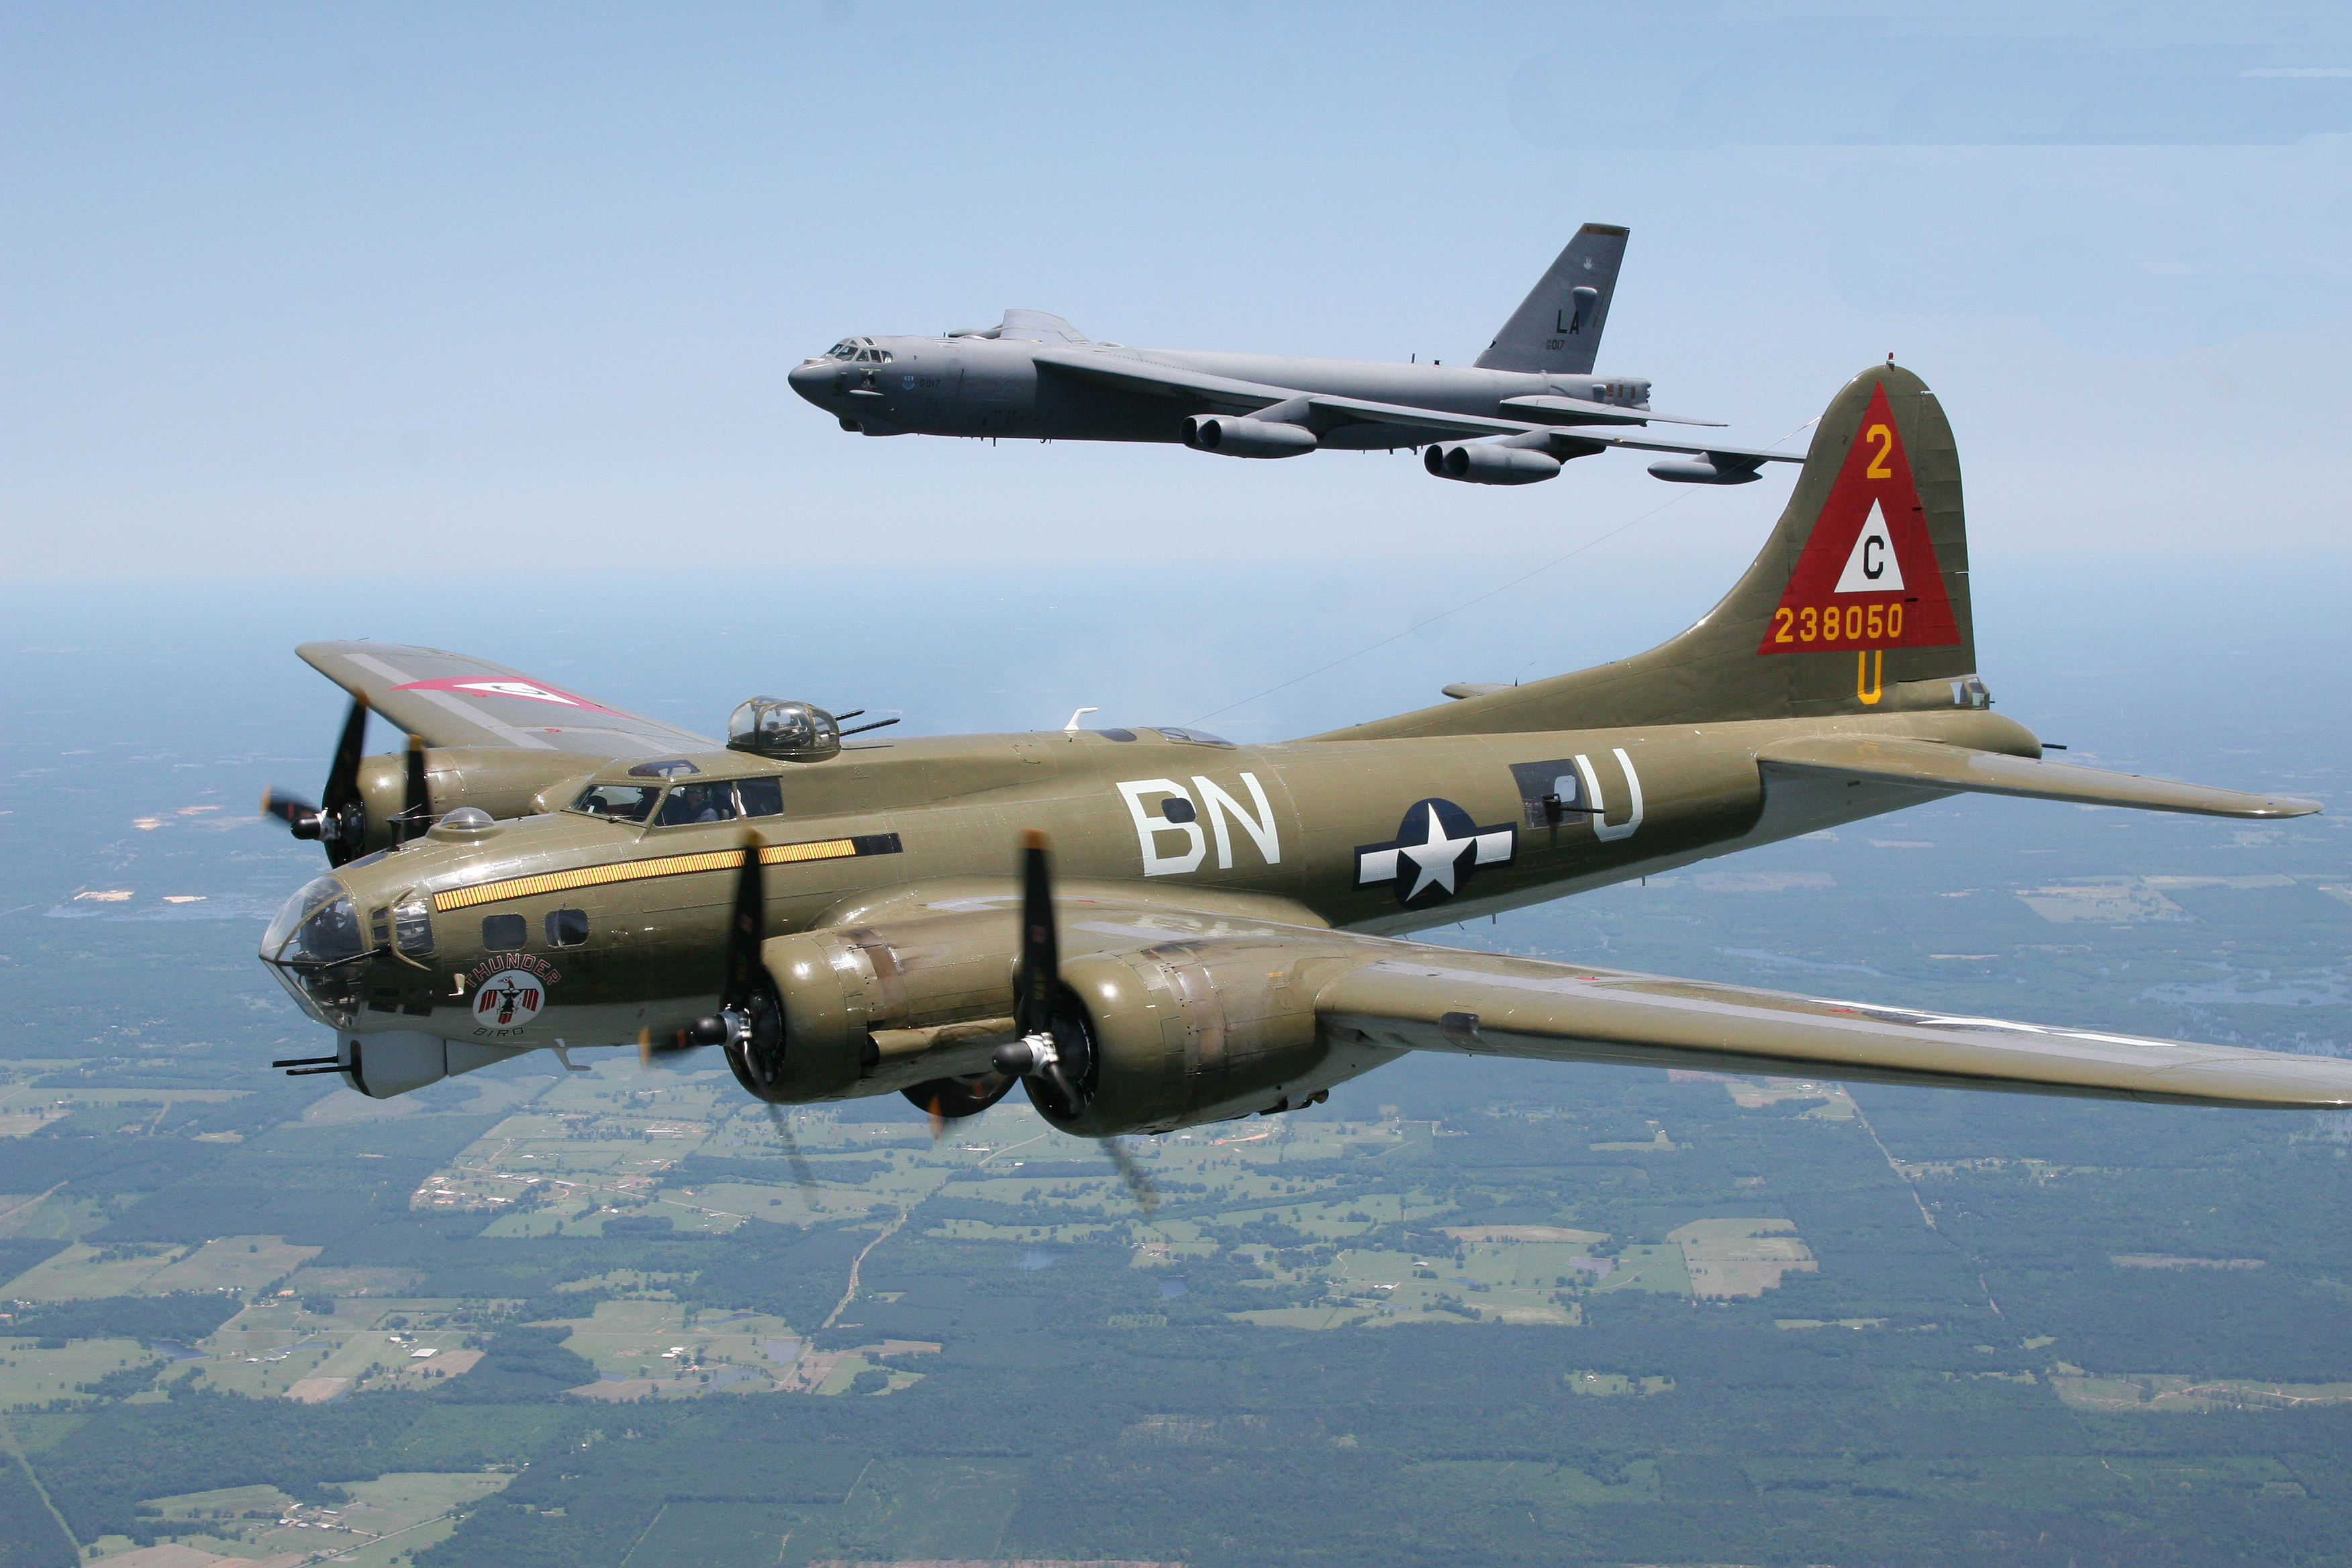 Boeing B-17 Flying Fortress #04